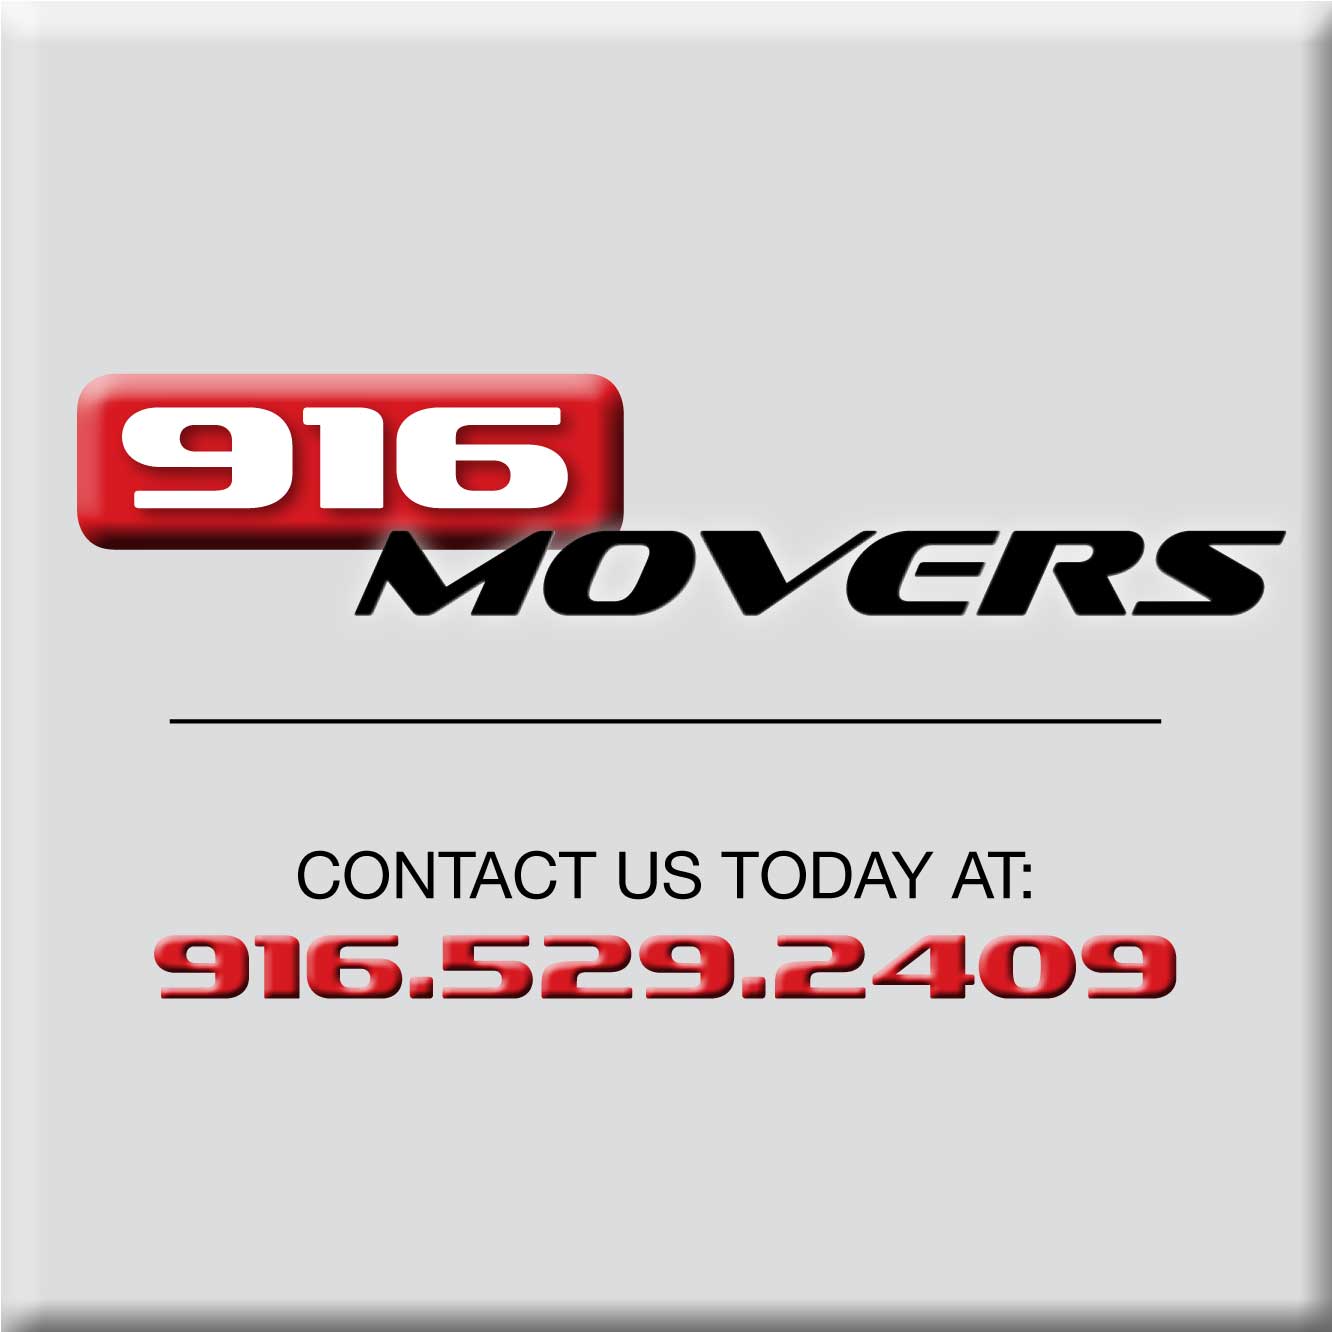 916 Movers Inc